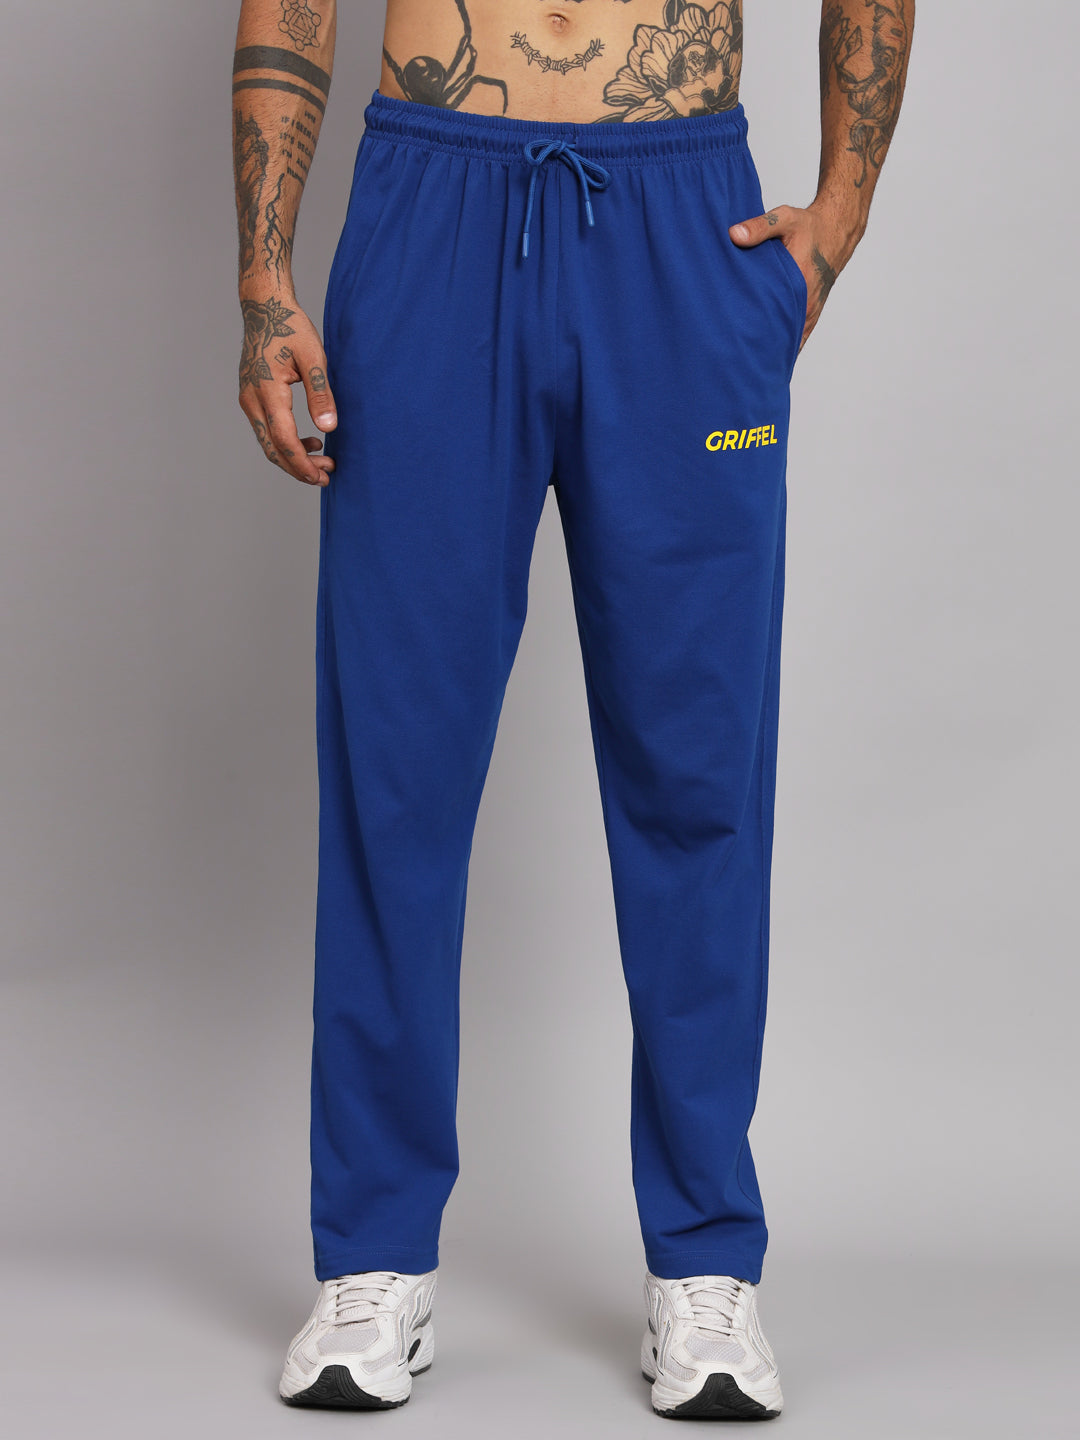 Griffel Men's Pre Winter Front Logo Solid Cotton Basic Hoodie and Joggers Full set Royal Tracksuit